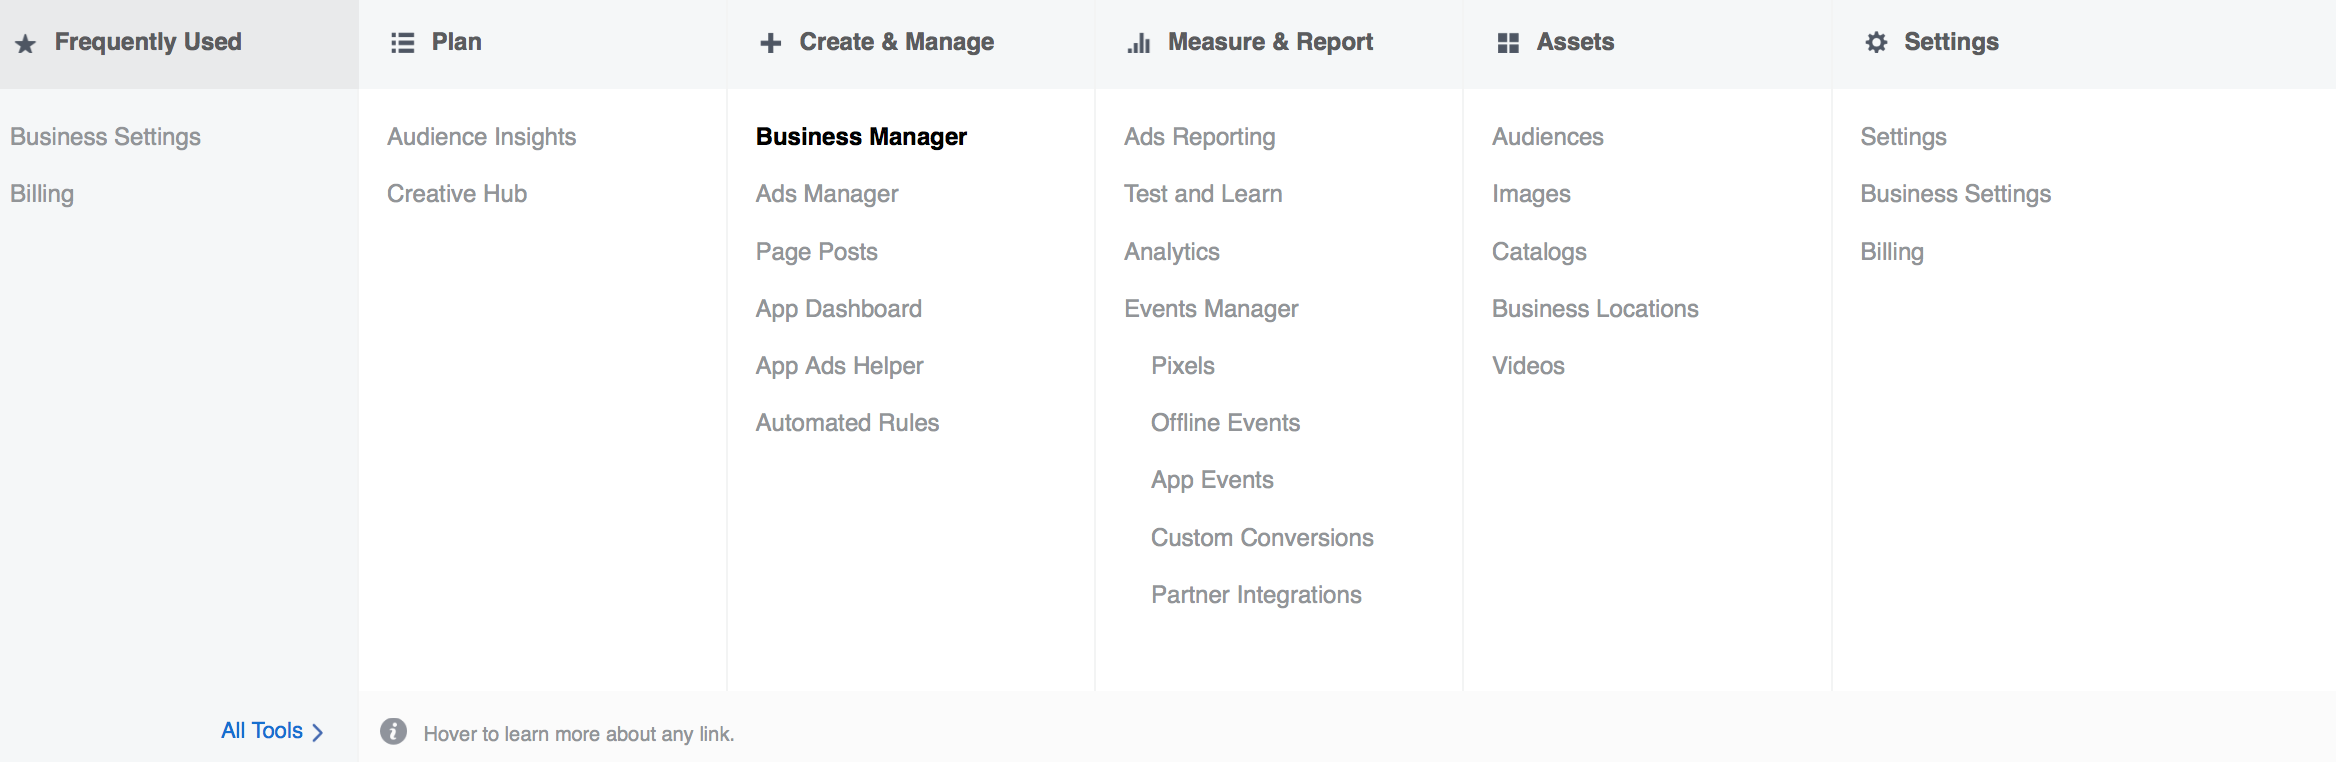 The Complete Guide to Facebook’s Business Manager